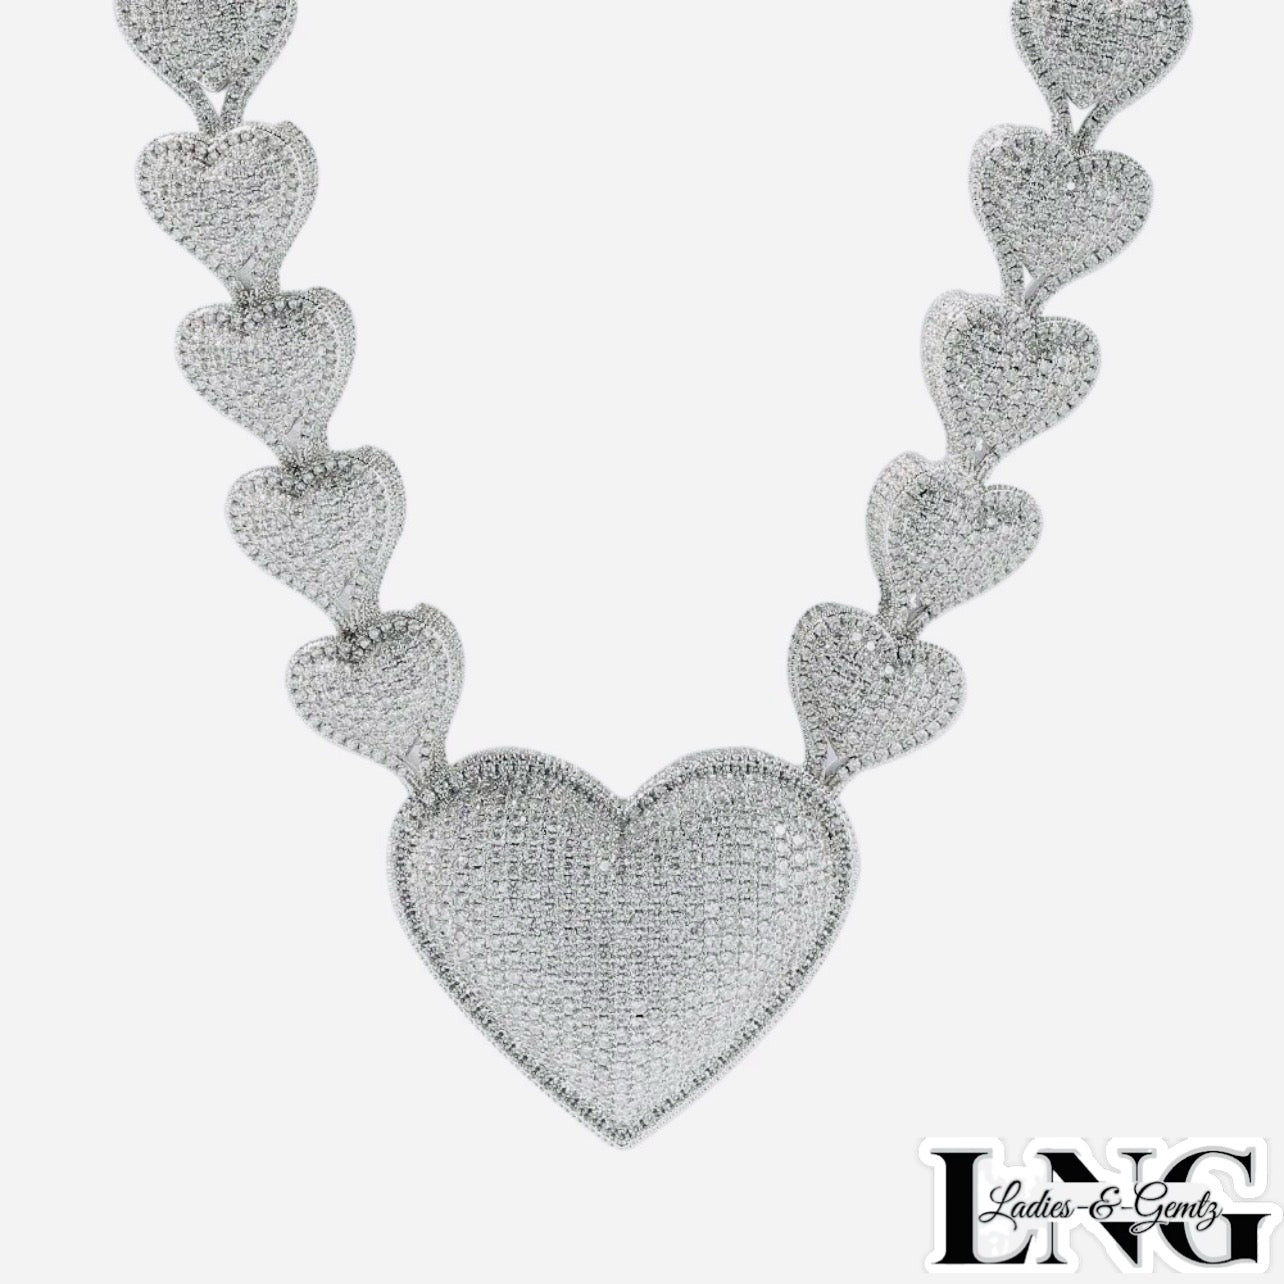 Sapphire Micro Pave AAAAA Cubic Zirconia Heart Pendant Necklace in Vermeil 14k White Gold By LadiesNGentz Boutique purchase at LadiesNGentz.com or Facetreasures.com